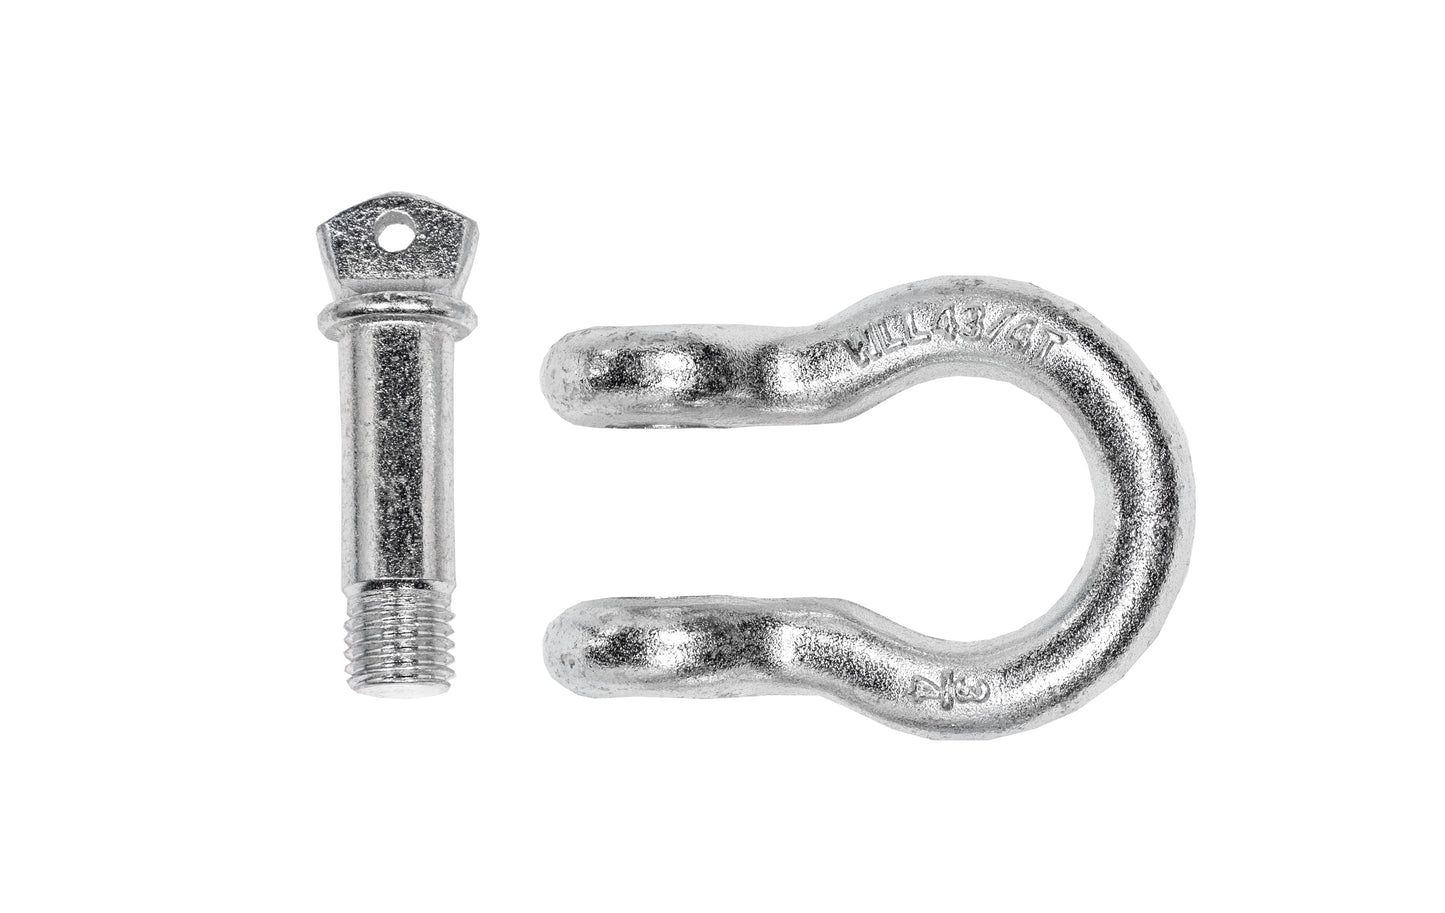 Recovery Shackle 3/4" 4.75 Ton